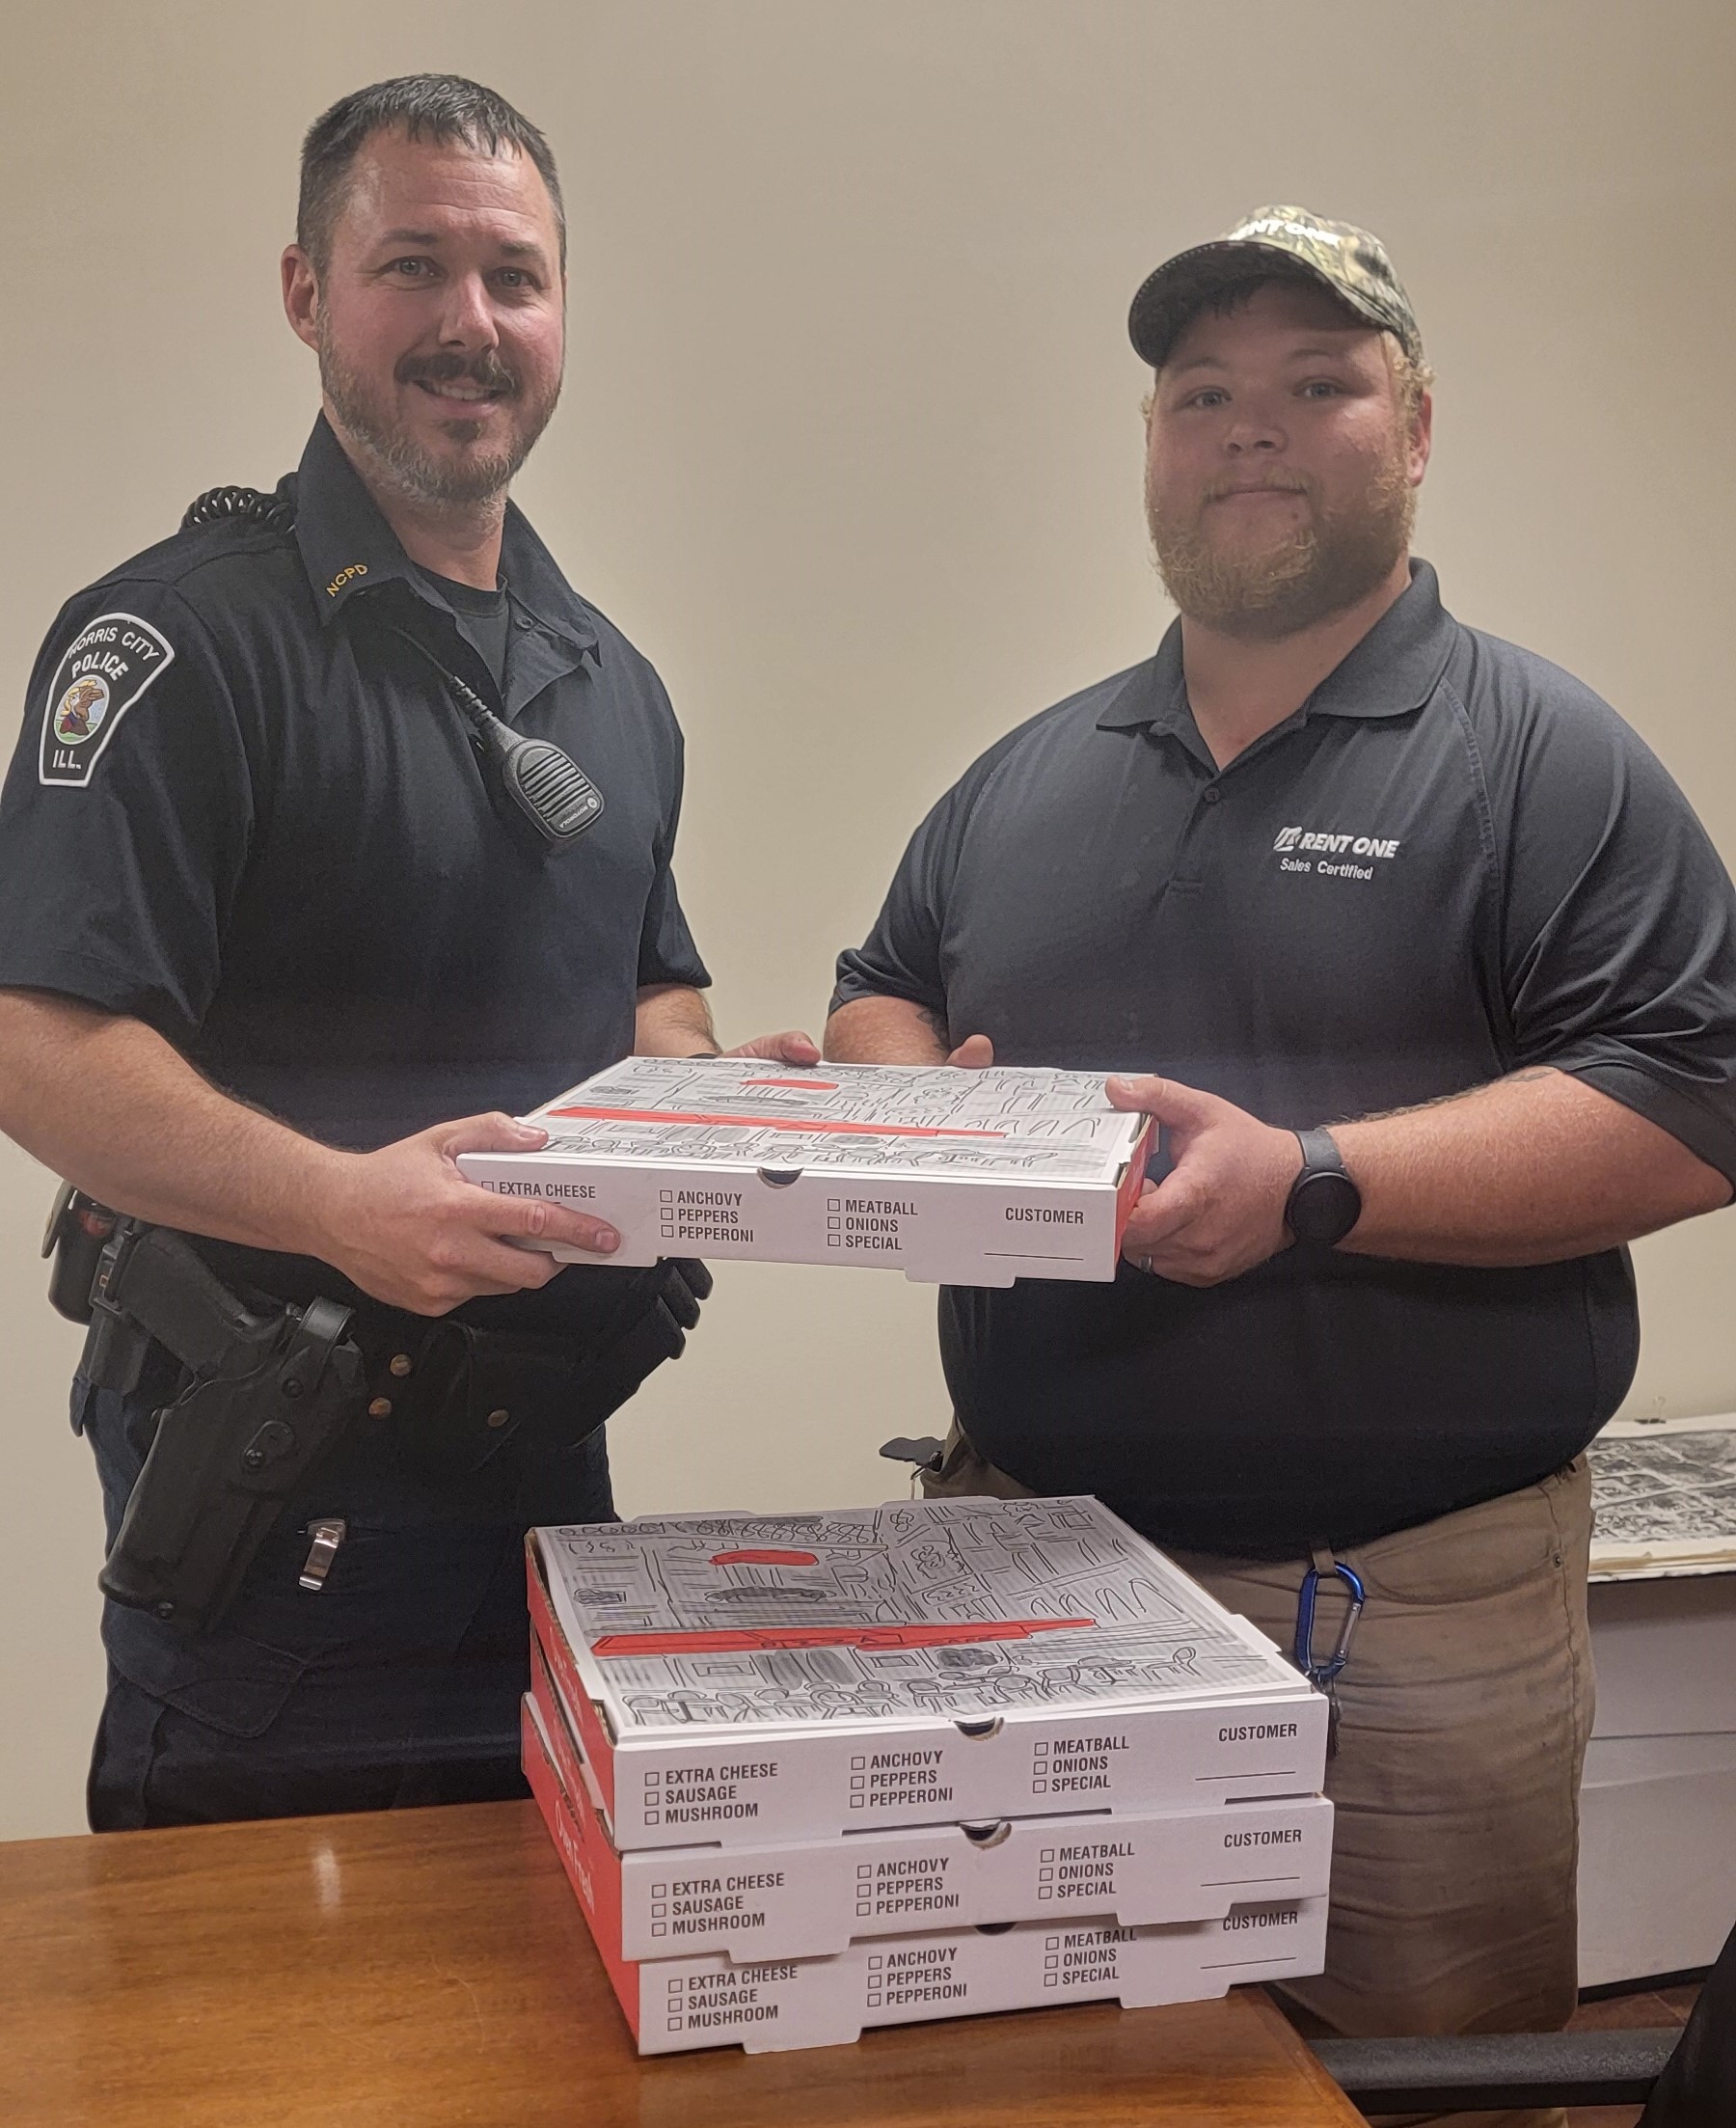 Thank you Rent One for the donating pizzas to the Police Department for their appreciation week. 